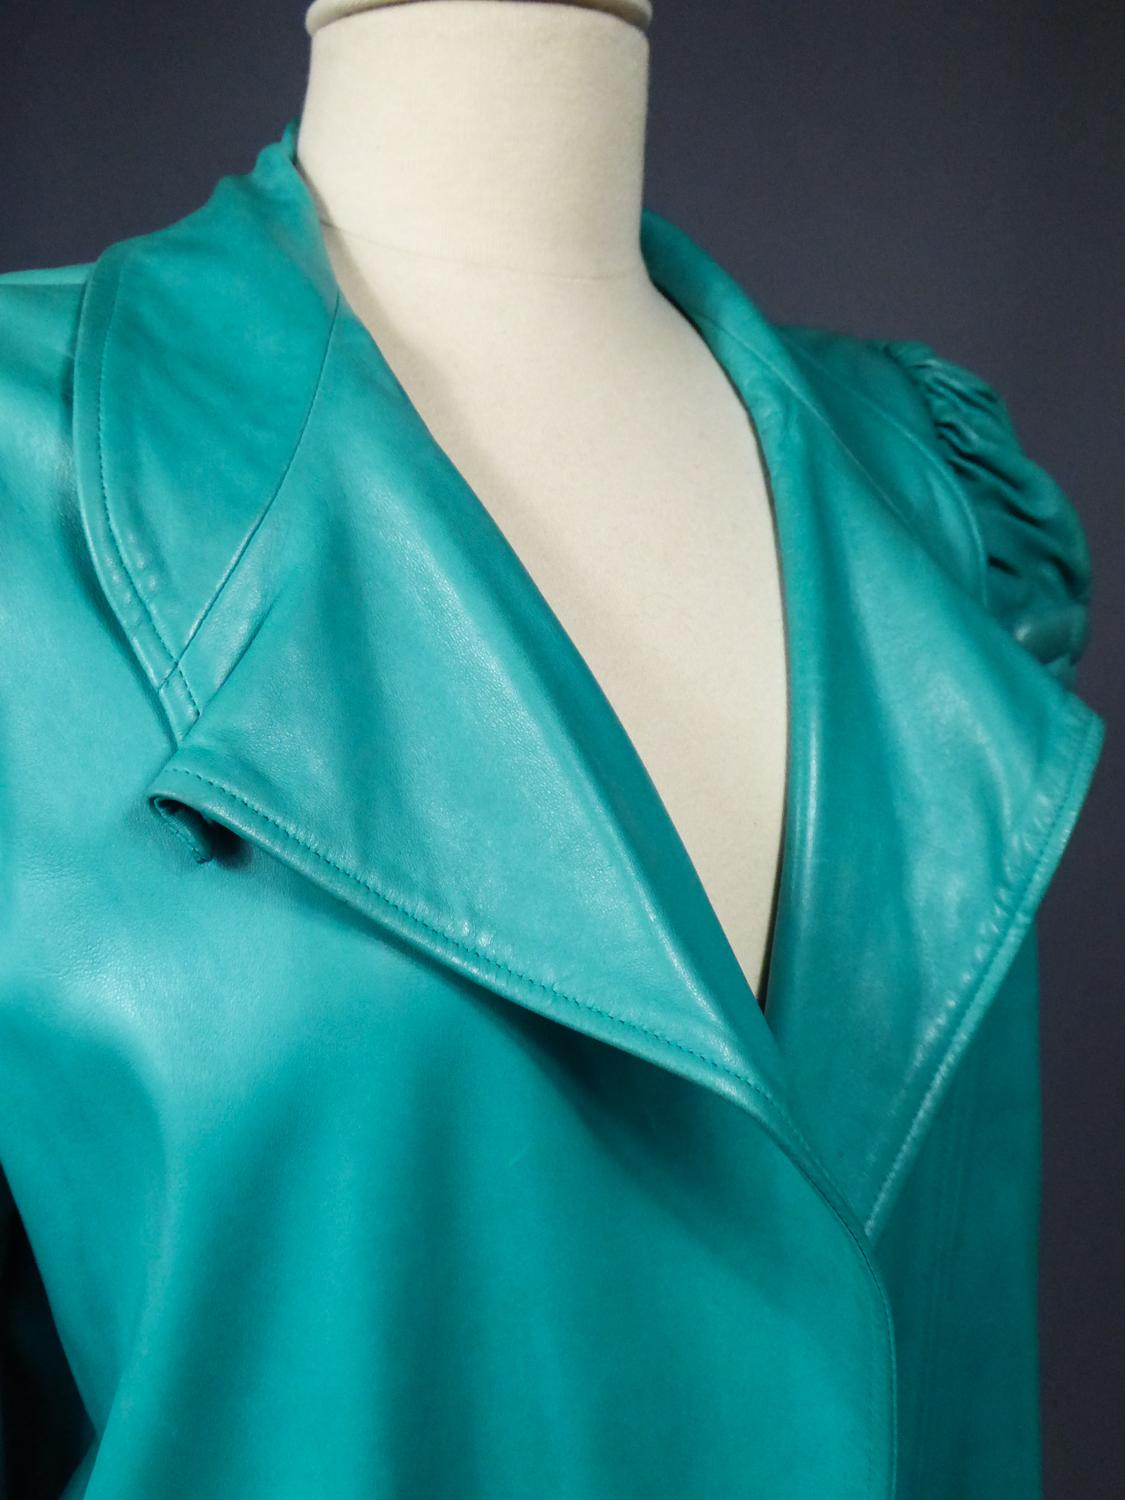 A Jean-Claude Jitrois Skirt and Jacket in Turquoise Leather - Fall 1985/1986  For Sale 2